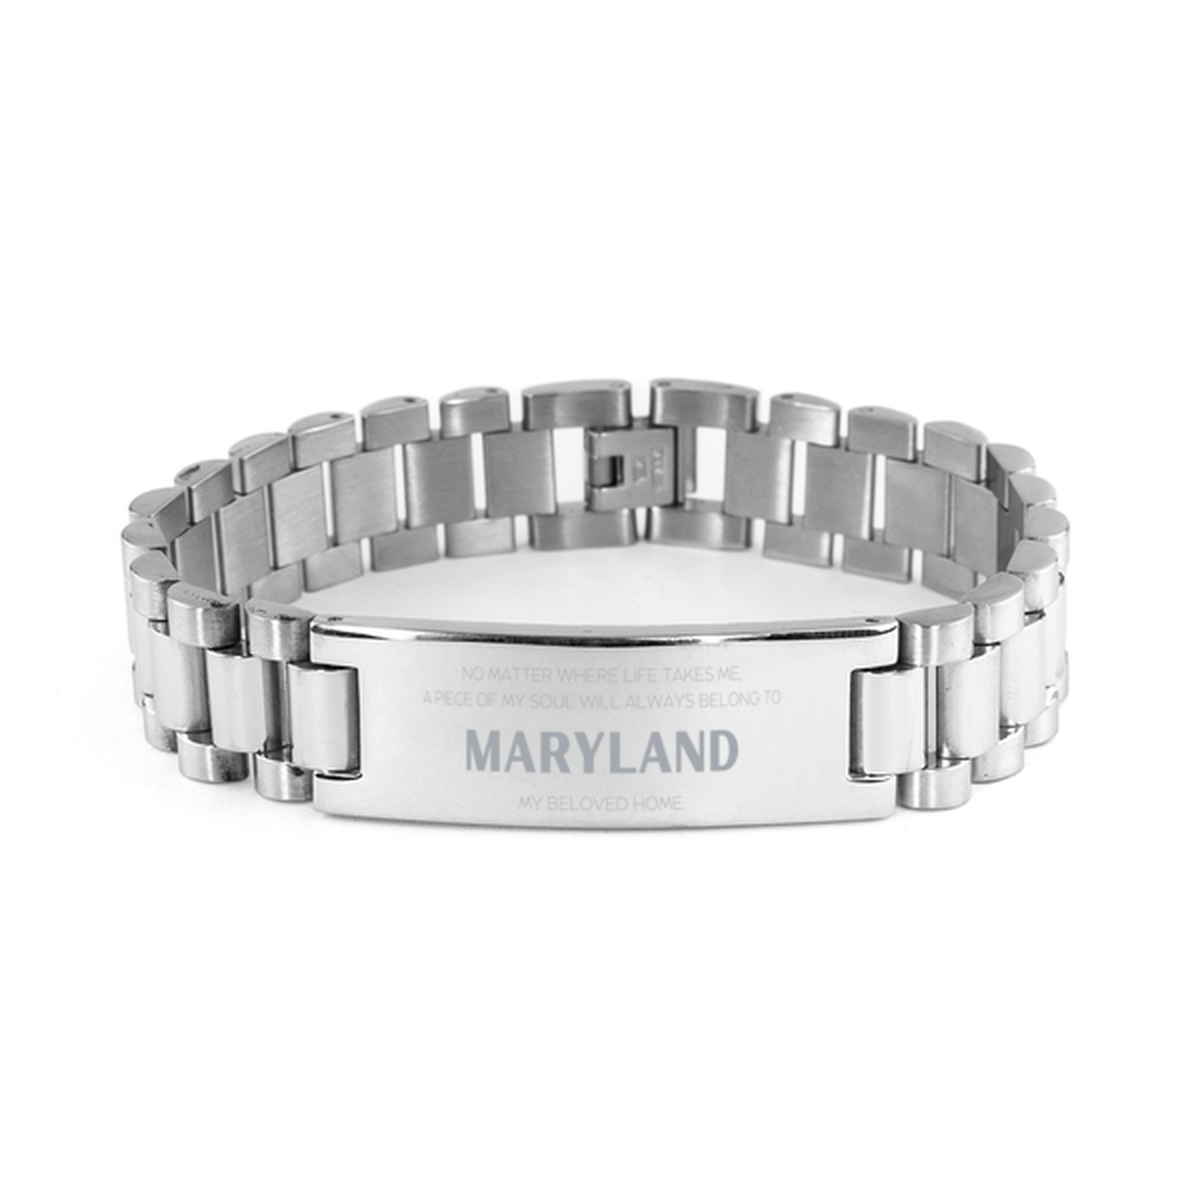 Love Maryland State Gifts, My soul will always belong to Maryland, Proud Ladder Stainless Steel Bracelet, Birthday Unique Gifts For Maryland Men, Women, Friends